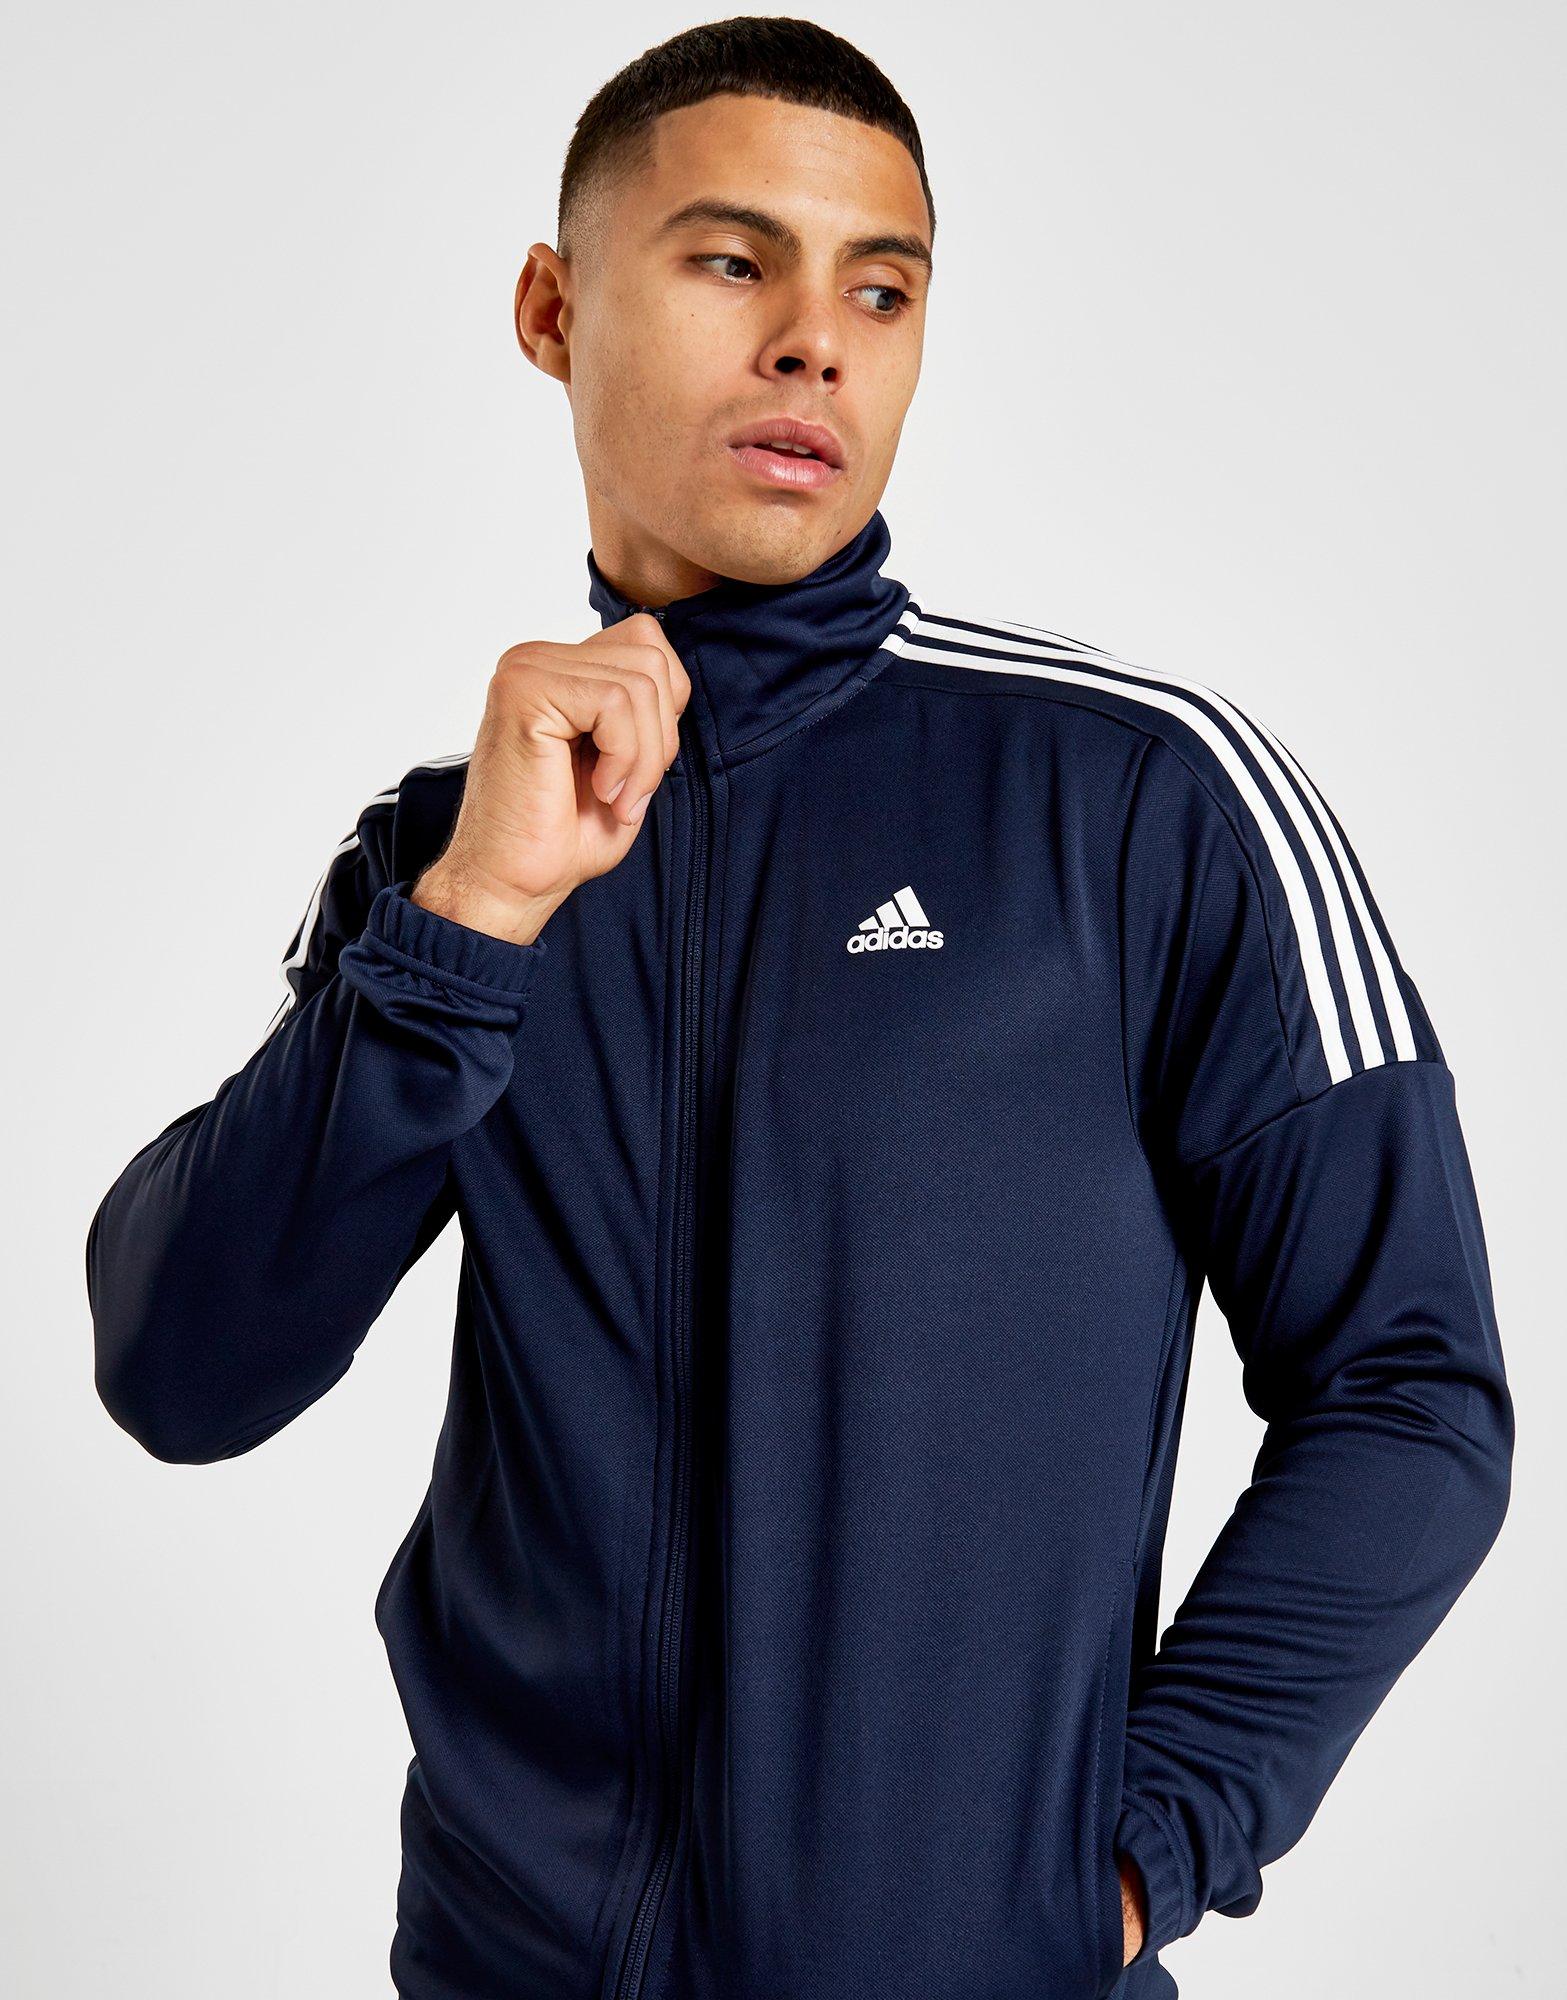 jd sports tracksuit tops